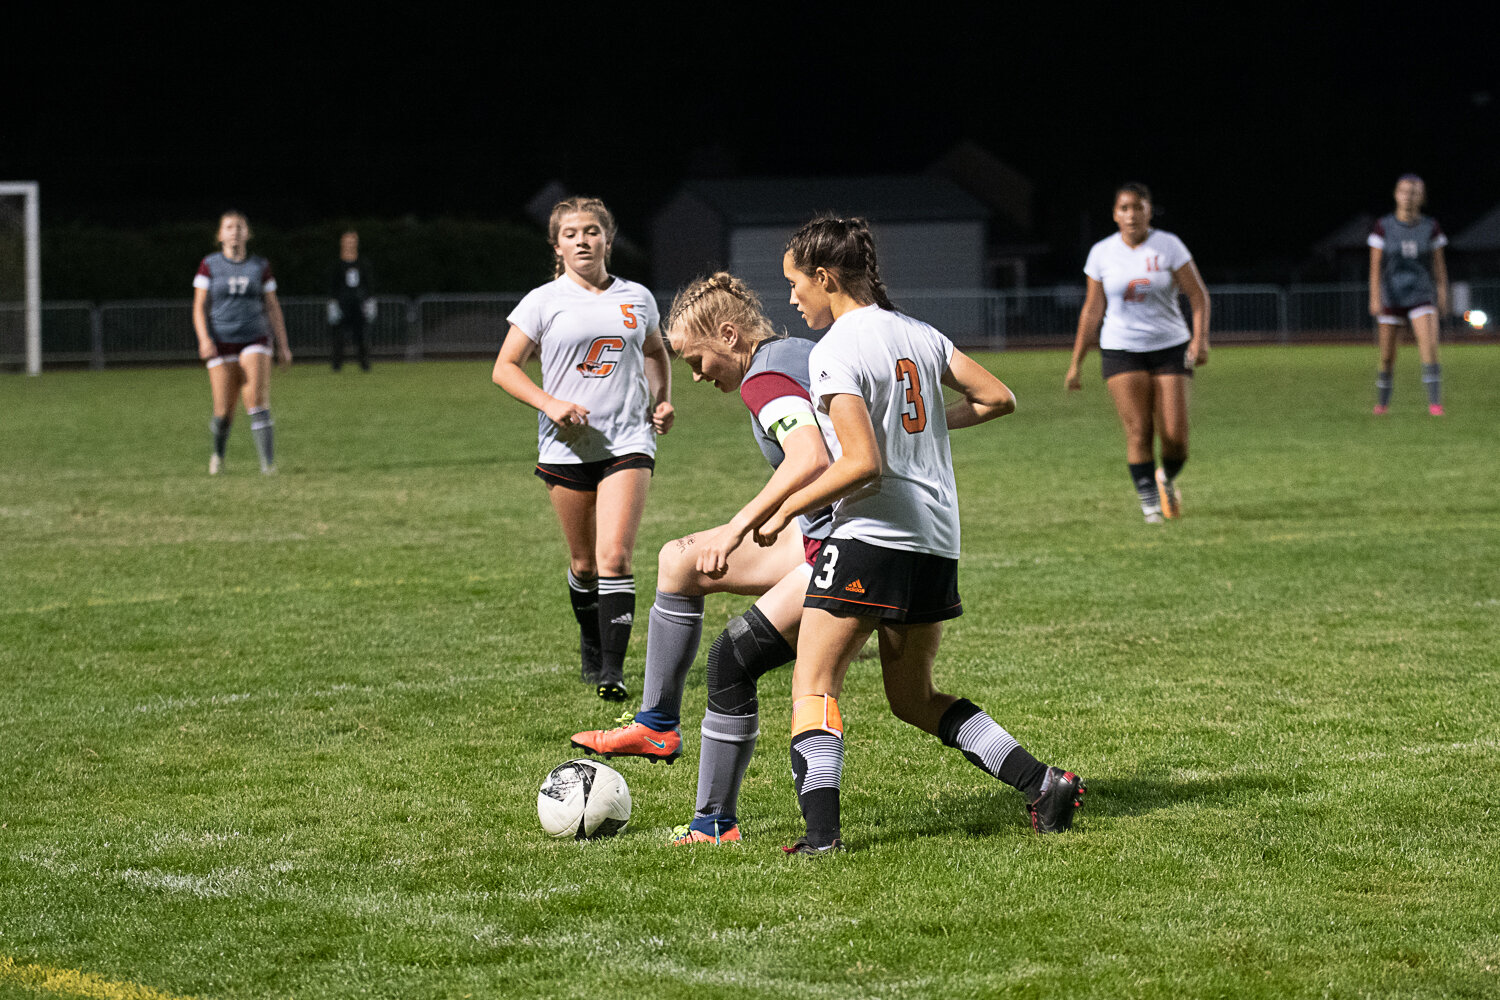 Centralia's Isabelle Gruginski and W.F. West's Zoey Robertson battle for possession during the two team's matchup on Sept. 21.